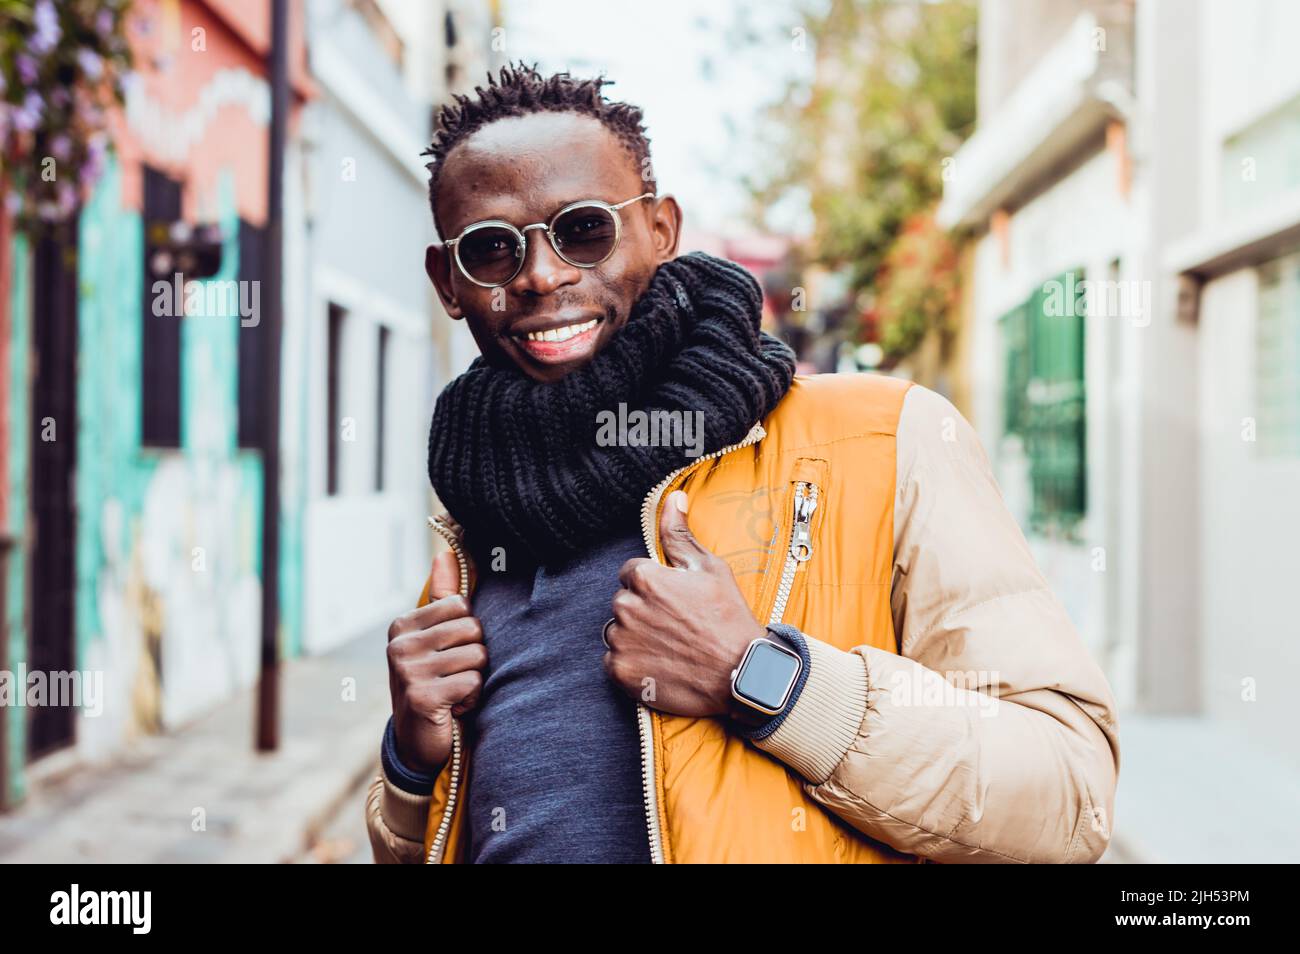 waist up portrait of young black african man, wearing glasses and snorting, smiling and grabbing his jacket lapel, standing in the middle of the stree Stock Photo